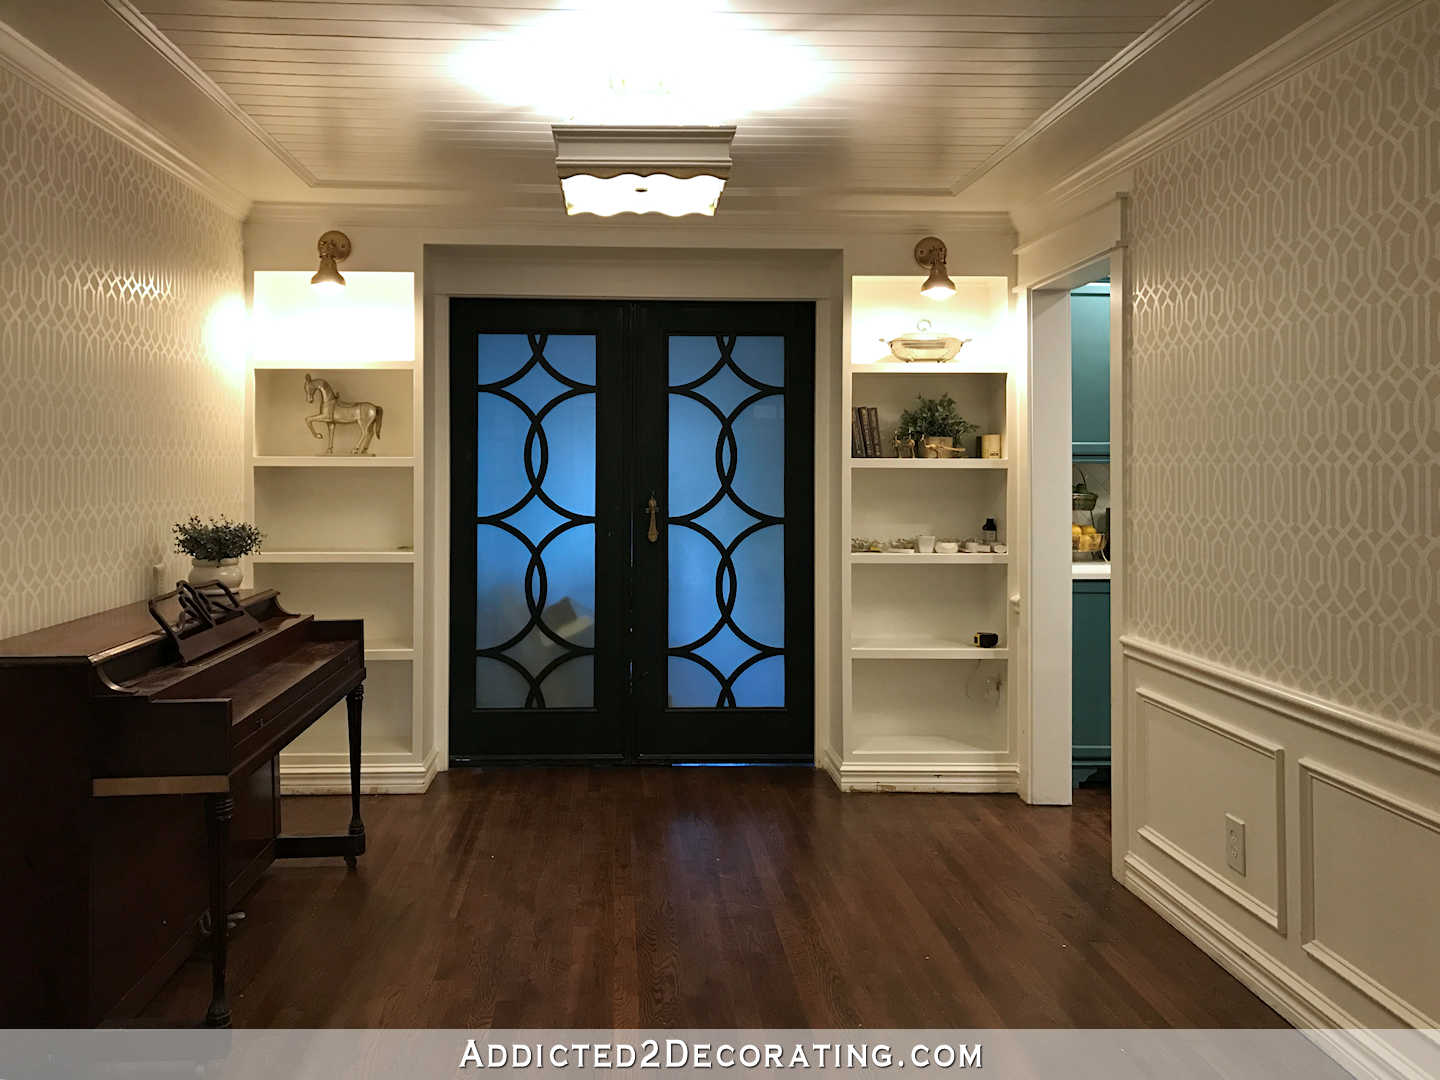 Music Room Walls With Stenciled Trellis Design